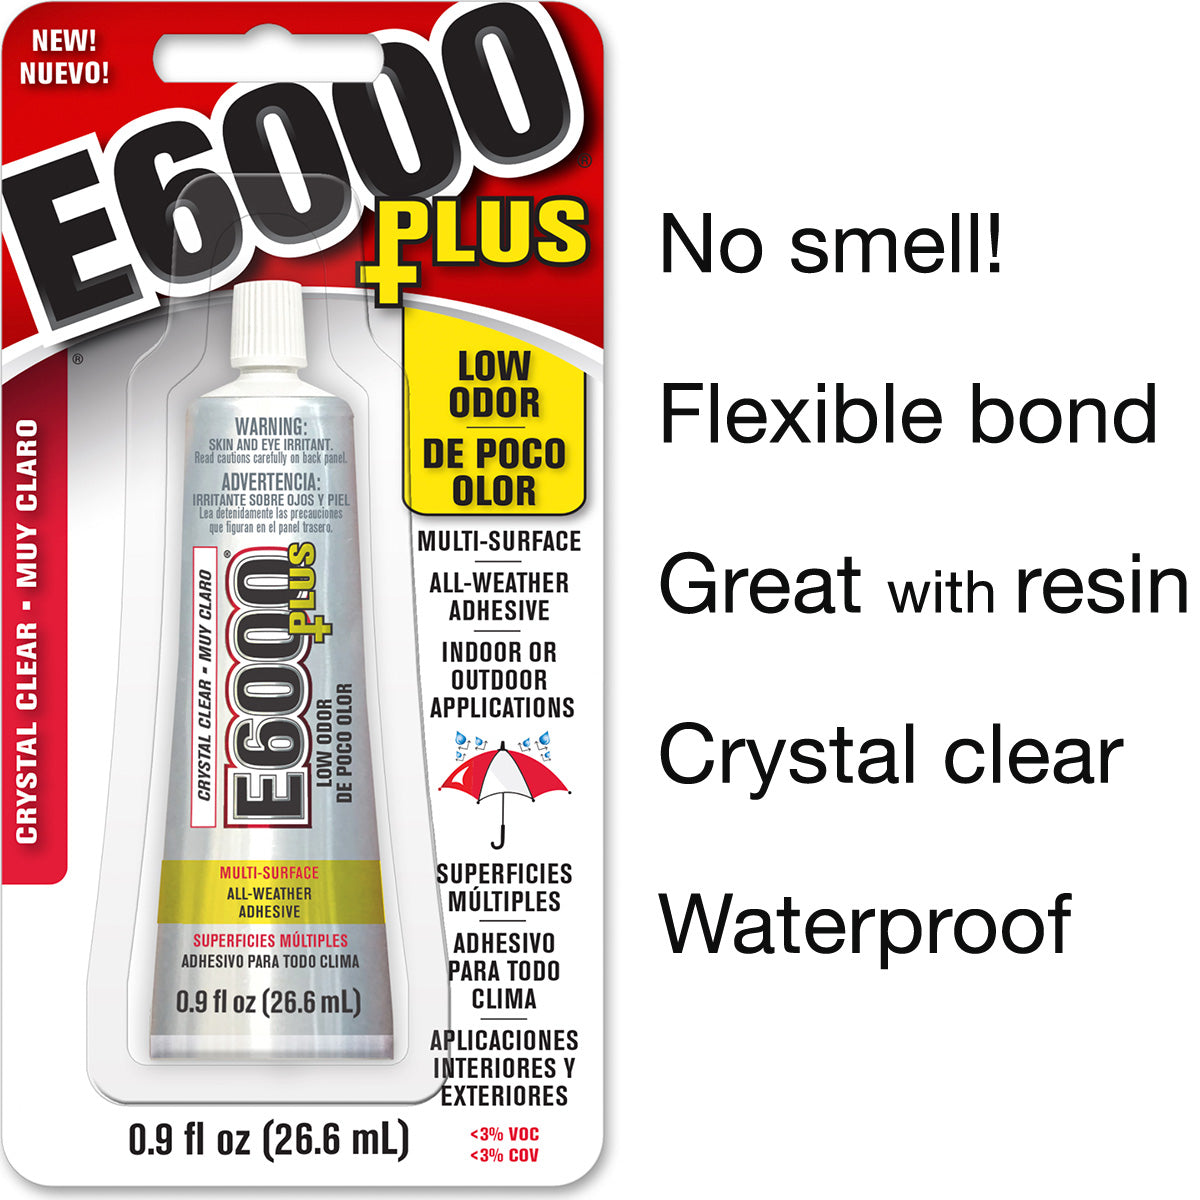 E6000+ Plus - flexible adhesive for Resin Jewelry Making - ODORLESS! –  Little Windows Brilliant Resin and Supplies